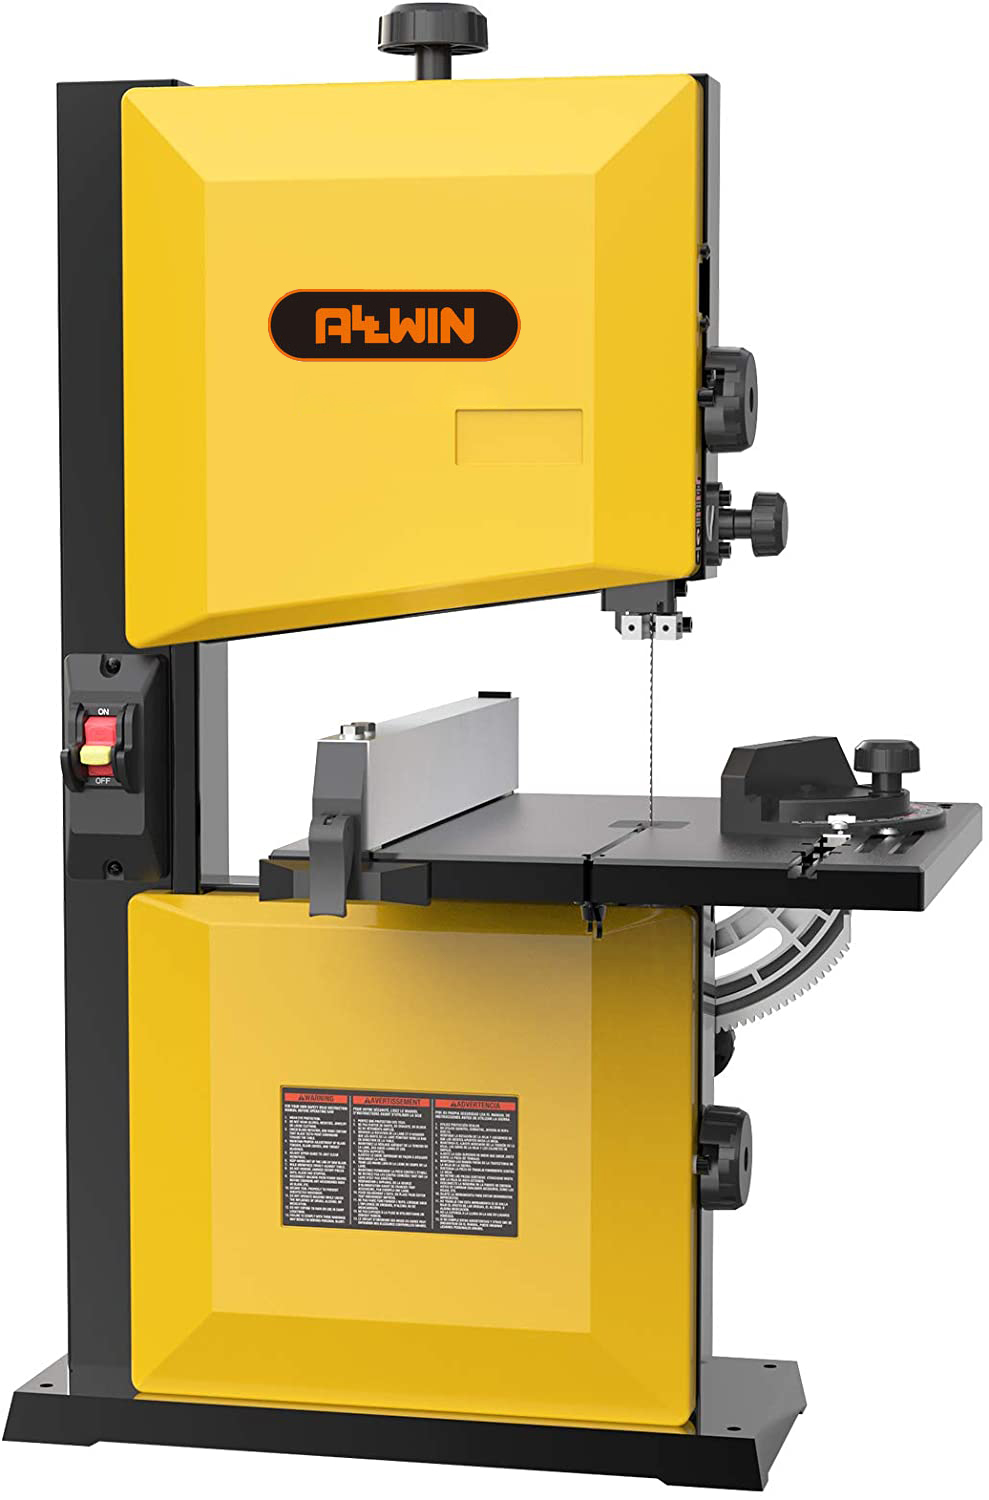 How to Set Up Allwin Band Saws